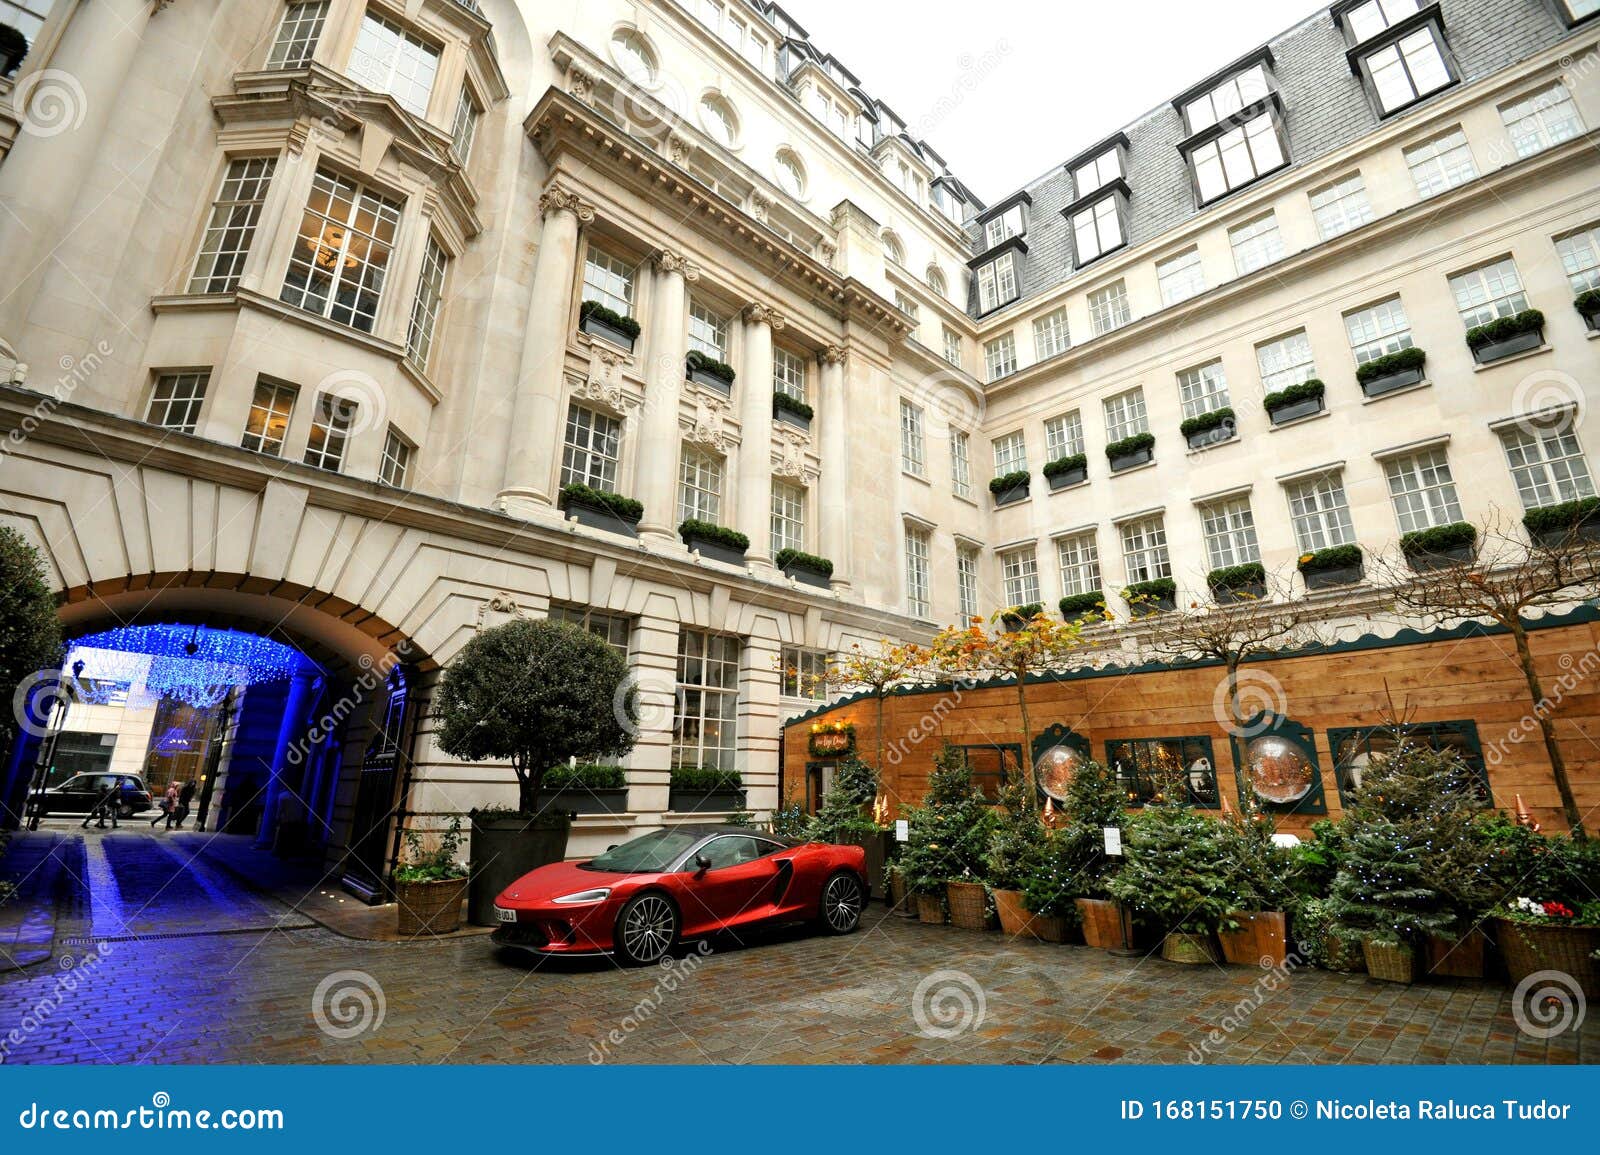 Rosewood London, Formerly Chancery Court, Is A Luxury 5-star Hotel In ...